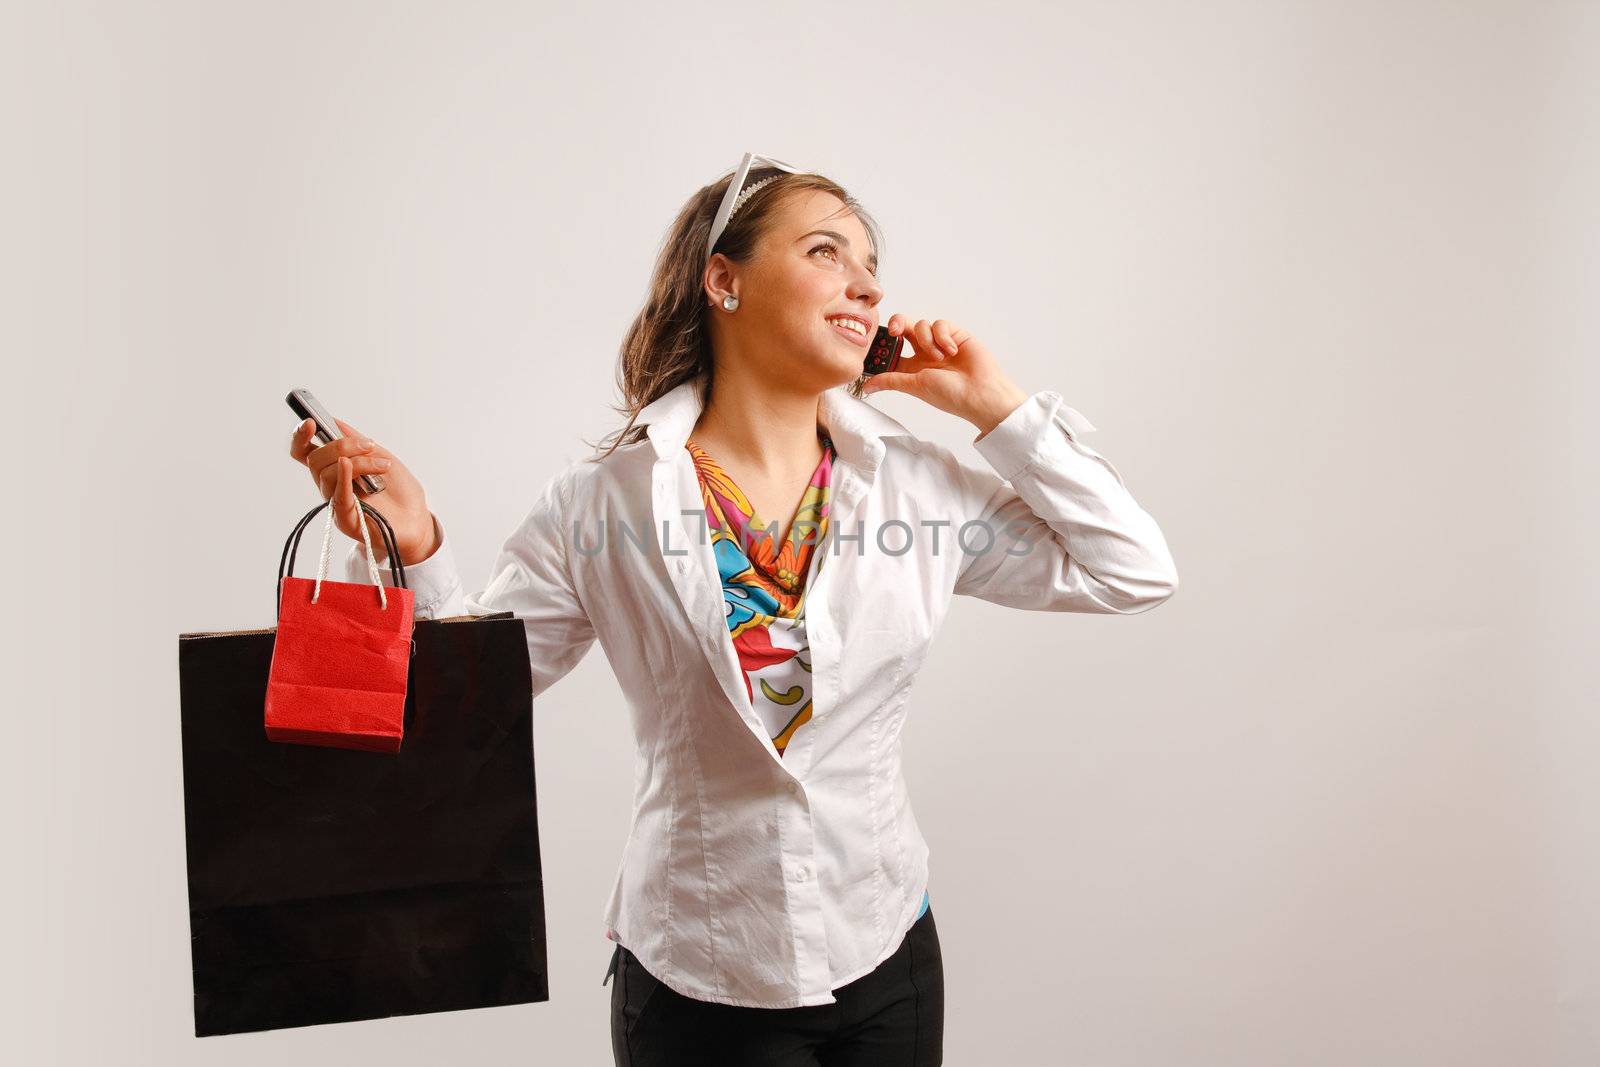 Modern looking young woman wearing white jacket talking on the phone and holding shopping bags